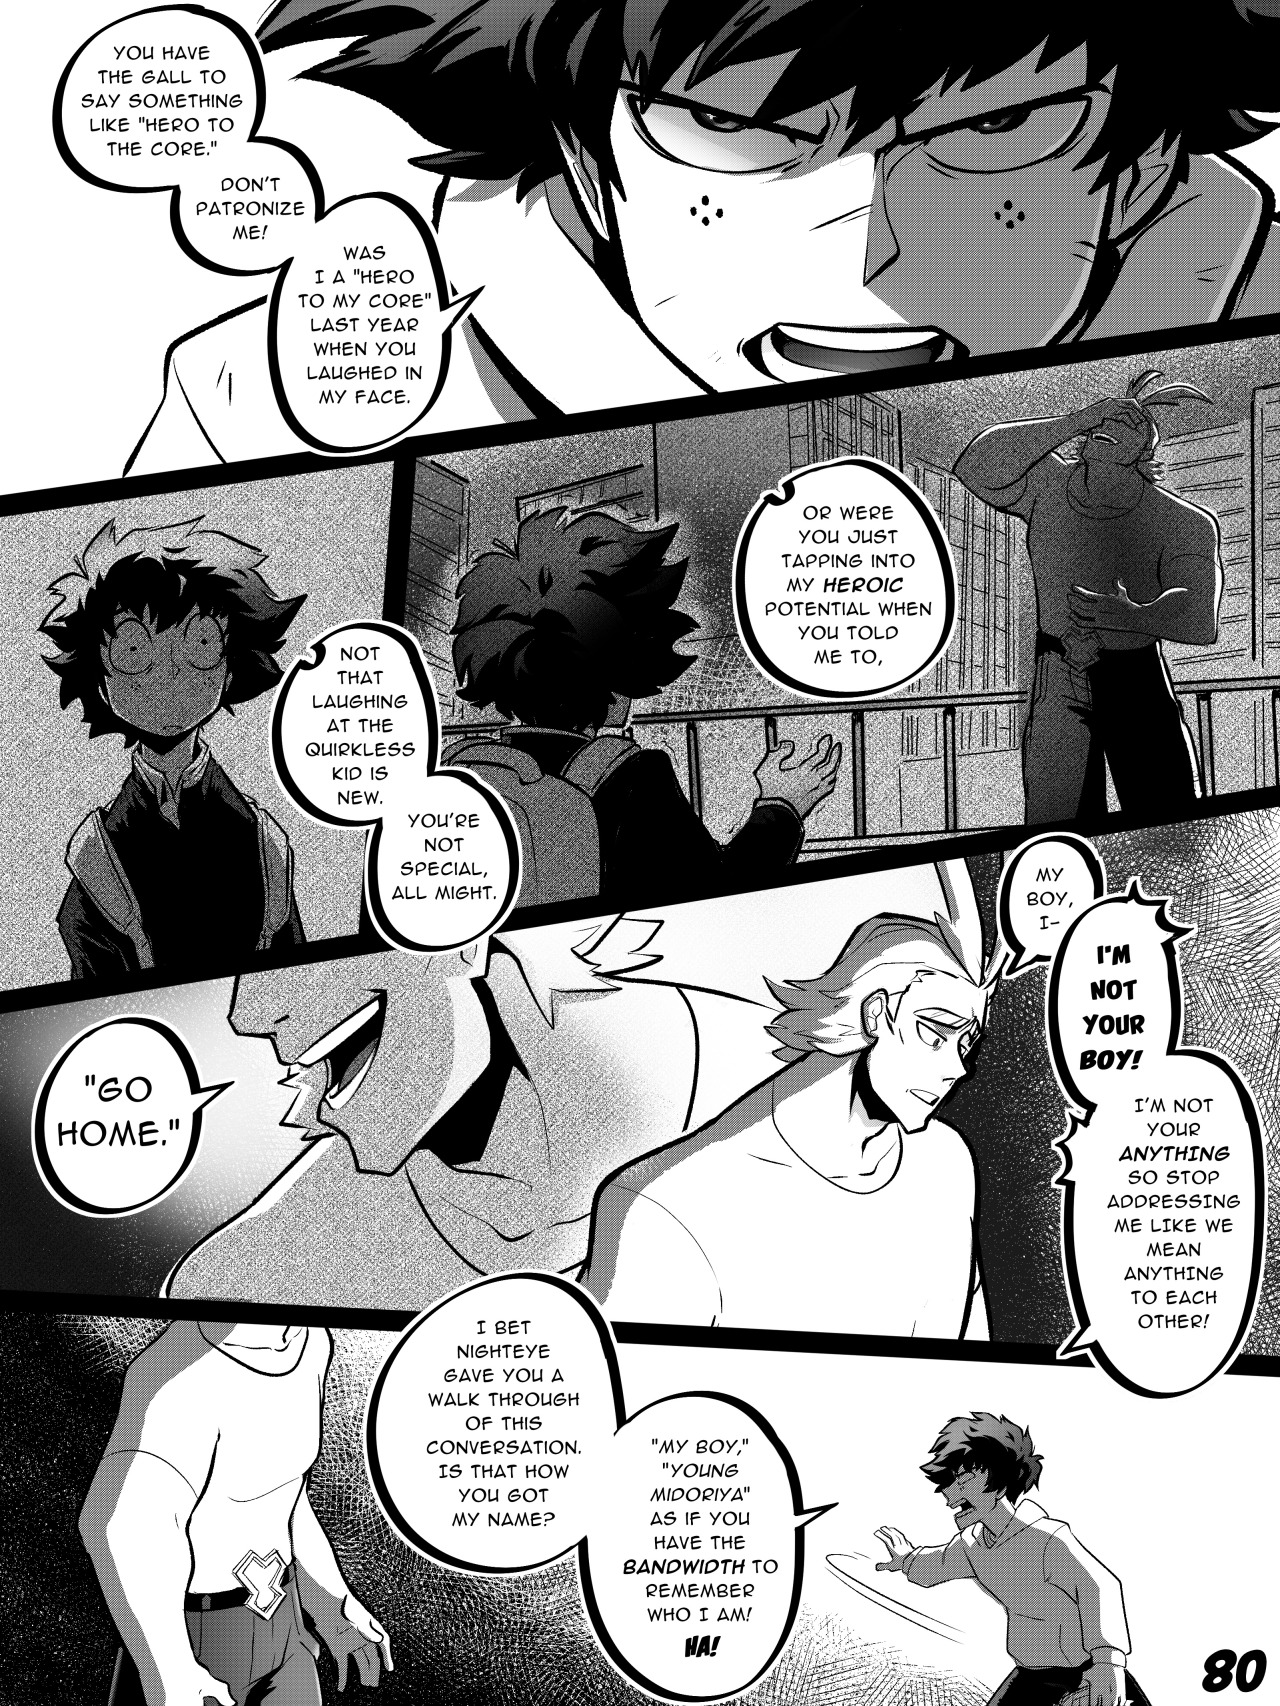 Evil Deku AU Page 80 [Next] [Previous] [First] I post 2 additional pages on my Patreon each week! Feel free to check it out here: [Patreon] [Instagram]